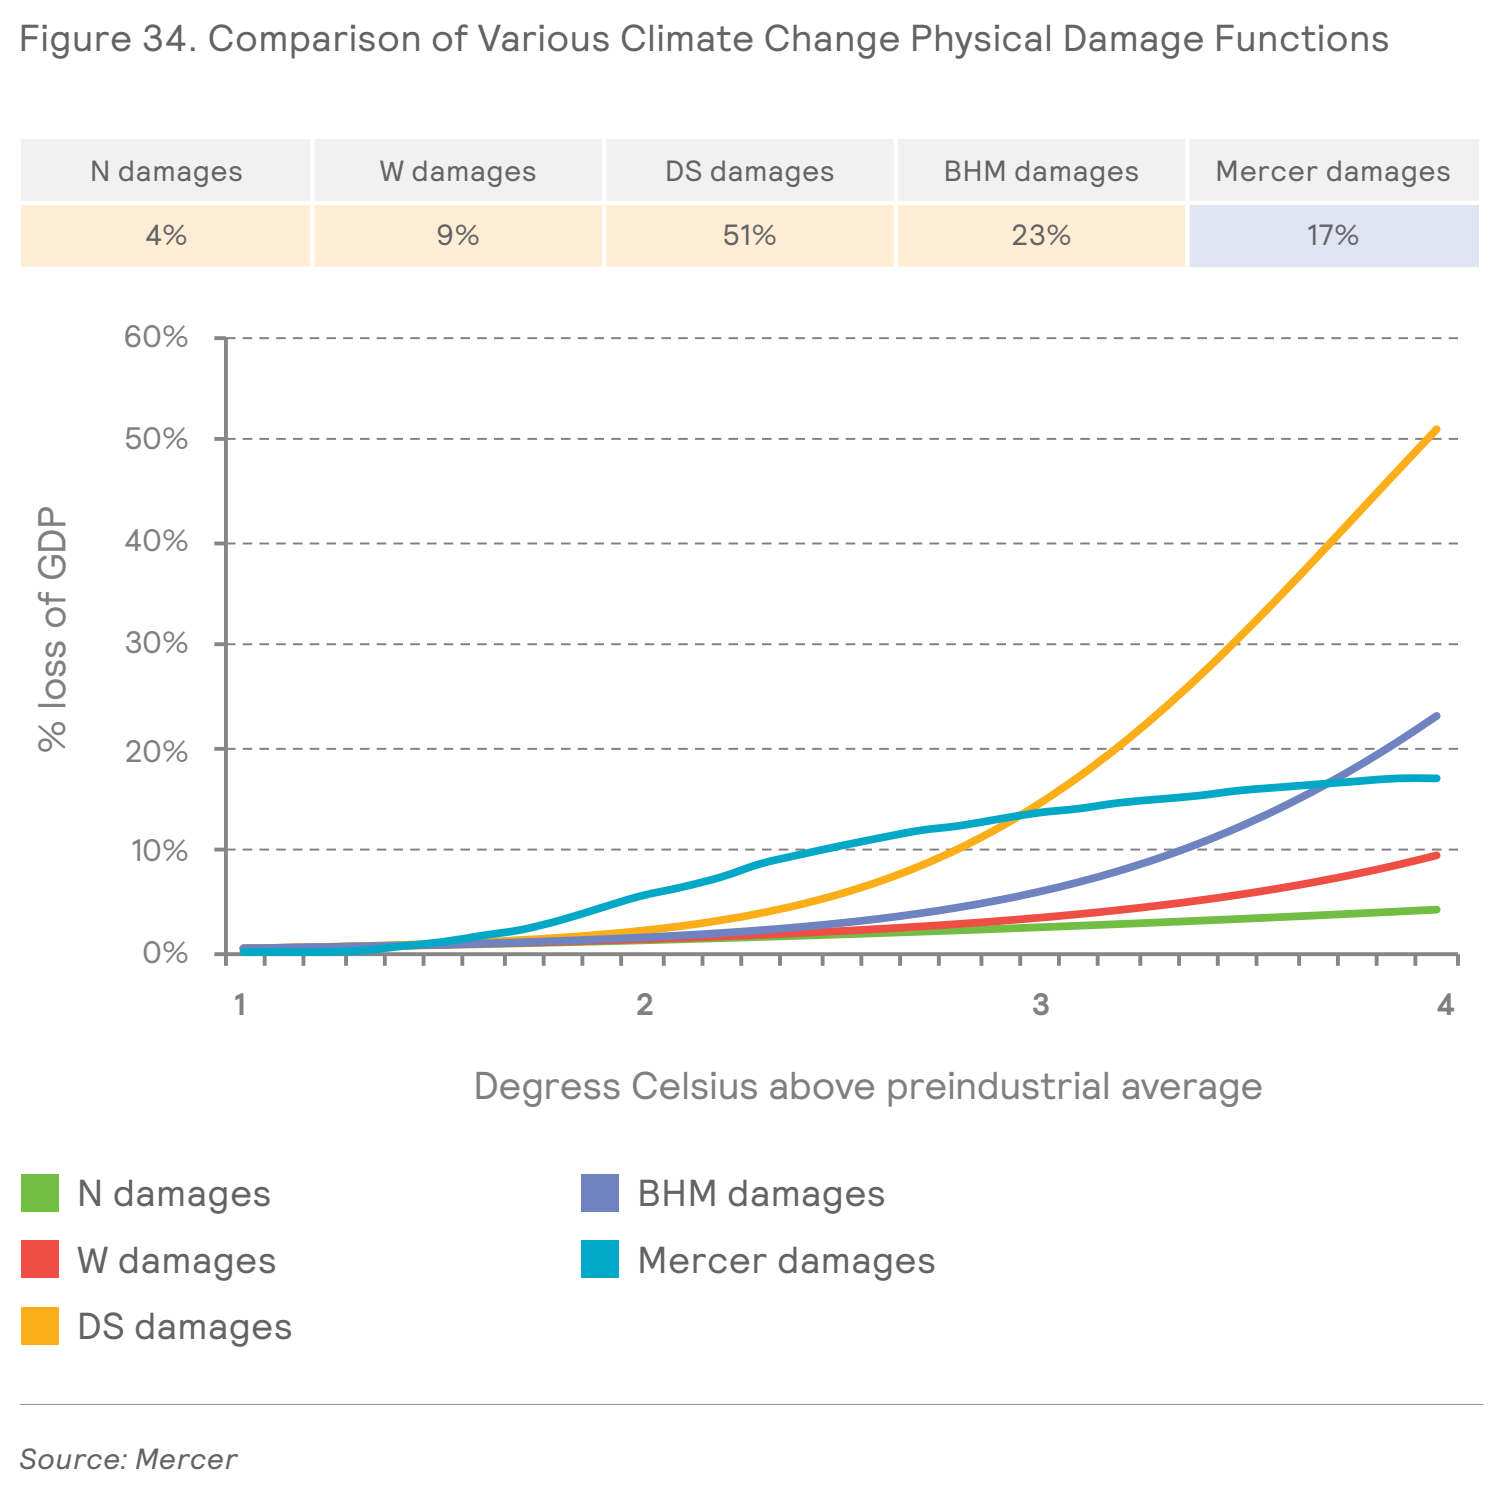 Line graphs comparing various climate change physical damage function showing potential damages in the range of 4 to 51% of GDP